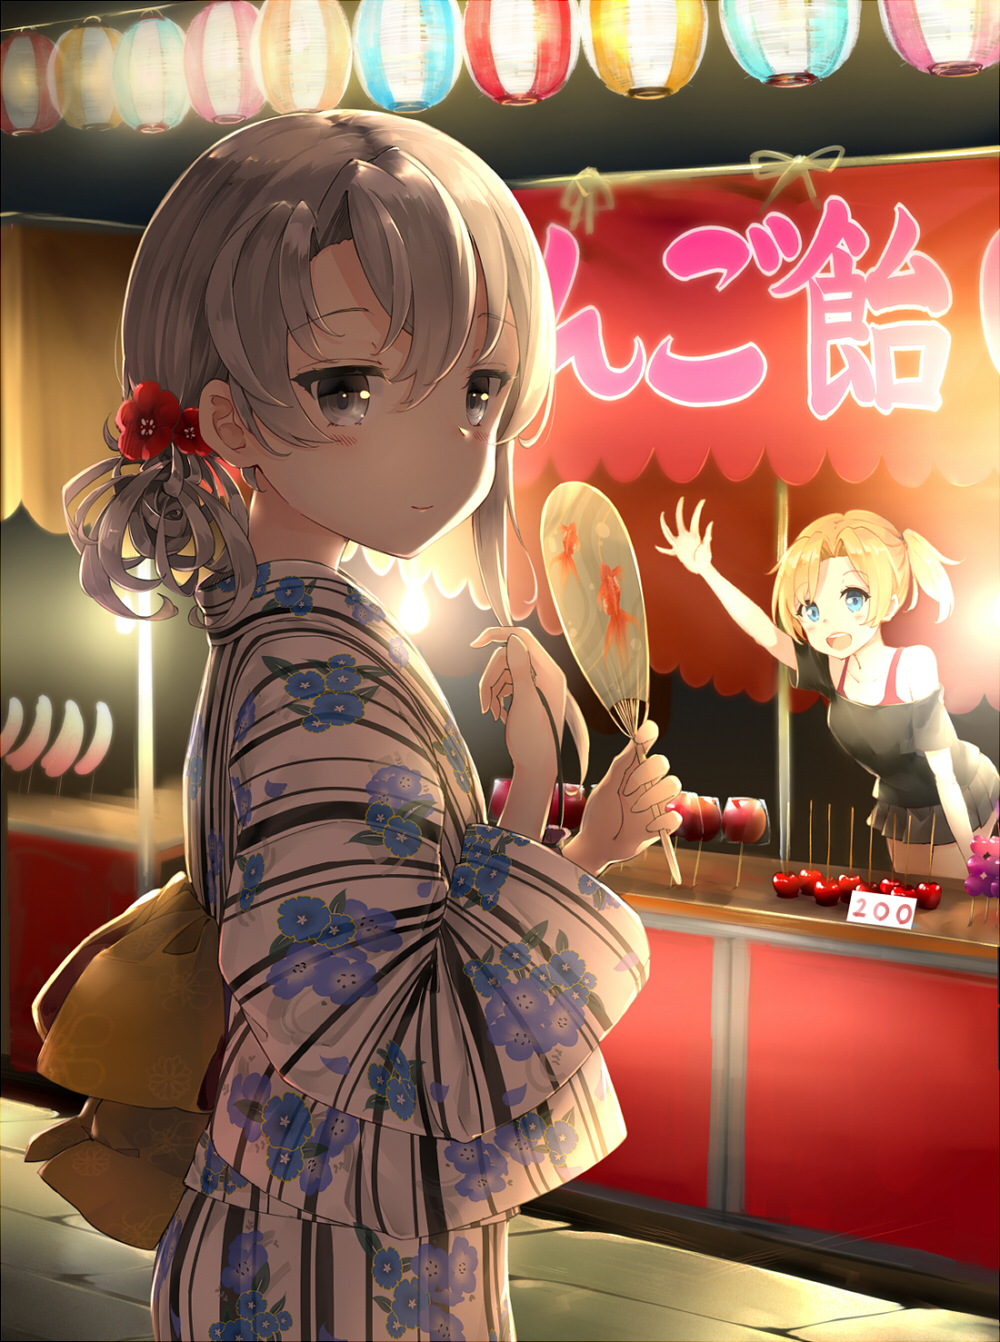 2girls alternate_costume arm_up asymmetrical_hair backlighting bangs blonde_hair blue_eyes blush candy_apple casual eyebrows eyebrows_visible_through_hair fan festival flipped_hair floral_print flower food_stand grey_eyes hair_flower hair_ornament highres holding_fan japanese_clothes kantai_collection kimono kinchaku lantern leaning_forward looking_at_viewer looking_to_the_side maikaze_(kantai_collection) multiple_girls nowaki_(kantai_collection) obi off_shoulder open_mouth paper_fan paper_lantern parted_bangs pleated_skirt ponytail sash short_hair silver_hair skirt smile somalisu summer_festival uchiwa yukata